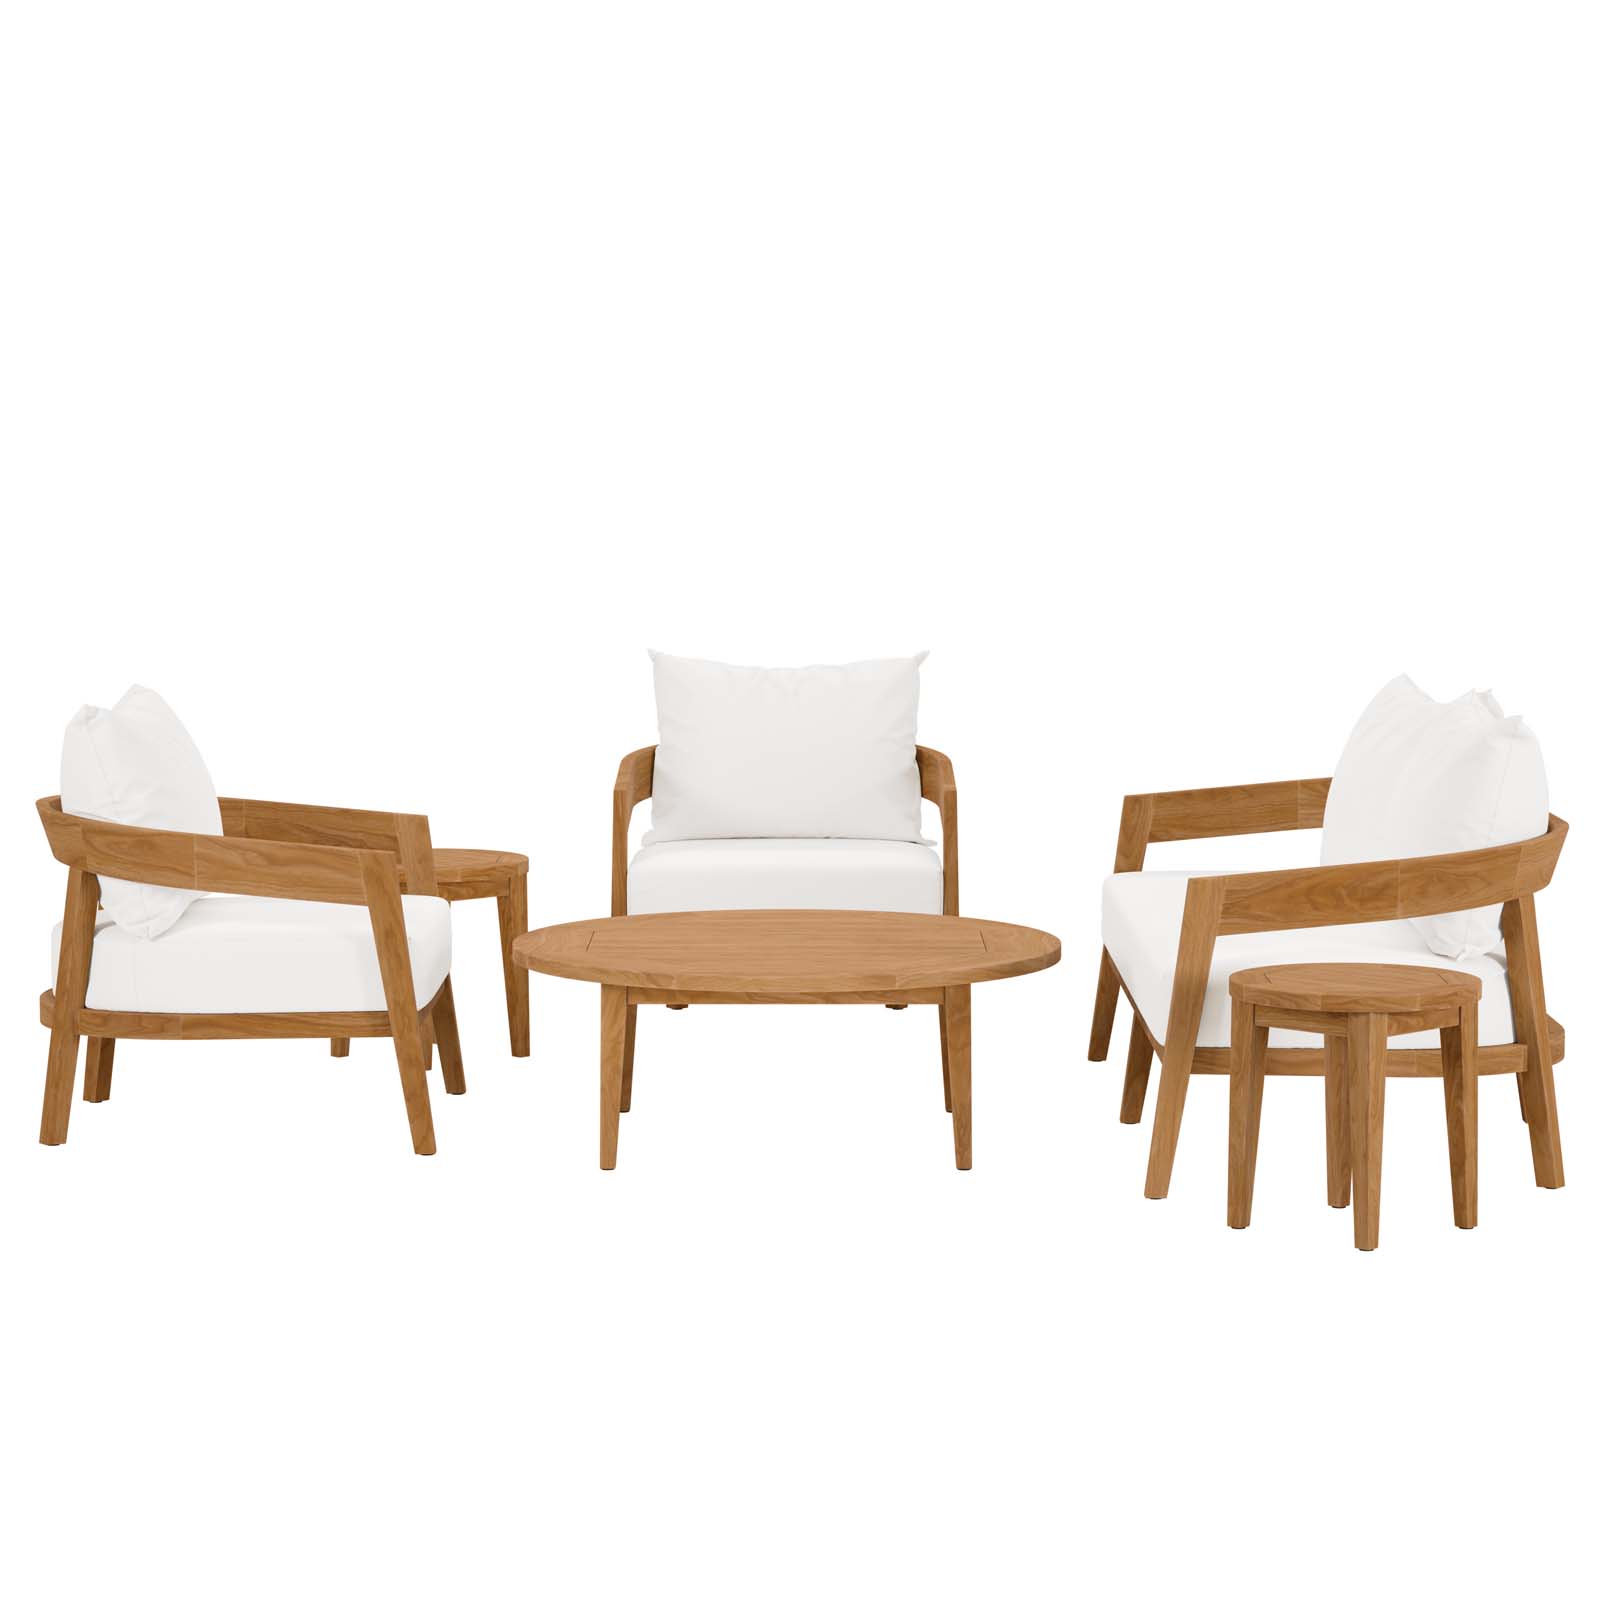 Lounge Sectional Sofa Chair Table Set, White Natural, Teak Wood, Fabric, Modern Contemporary, Outdoor Patio Balcony Cafe Bistro Garden Furniture Hotel Hospitality - image 4 of 10